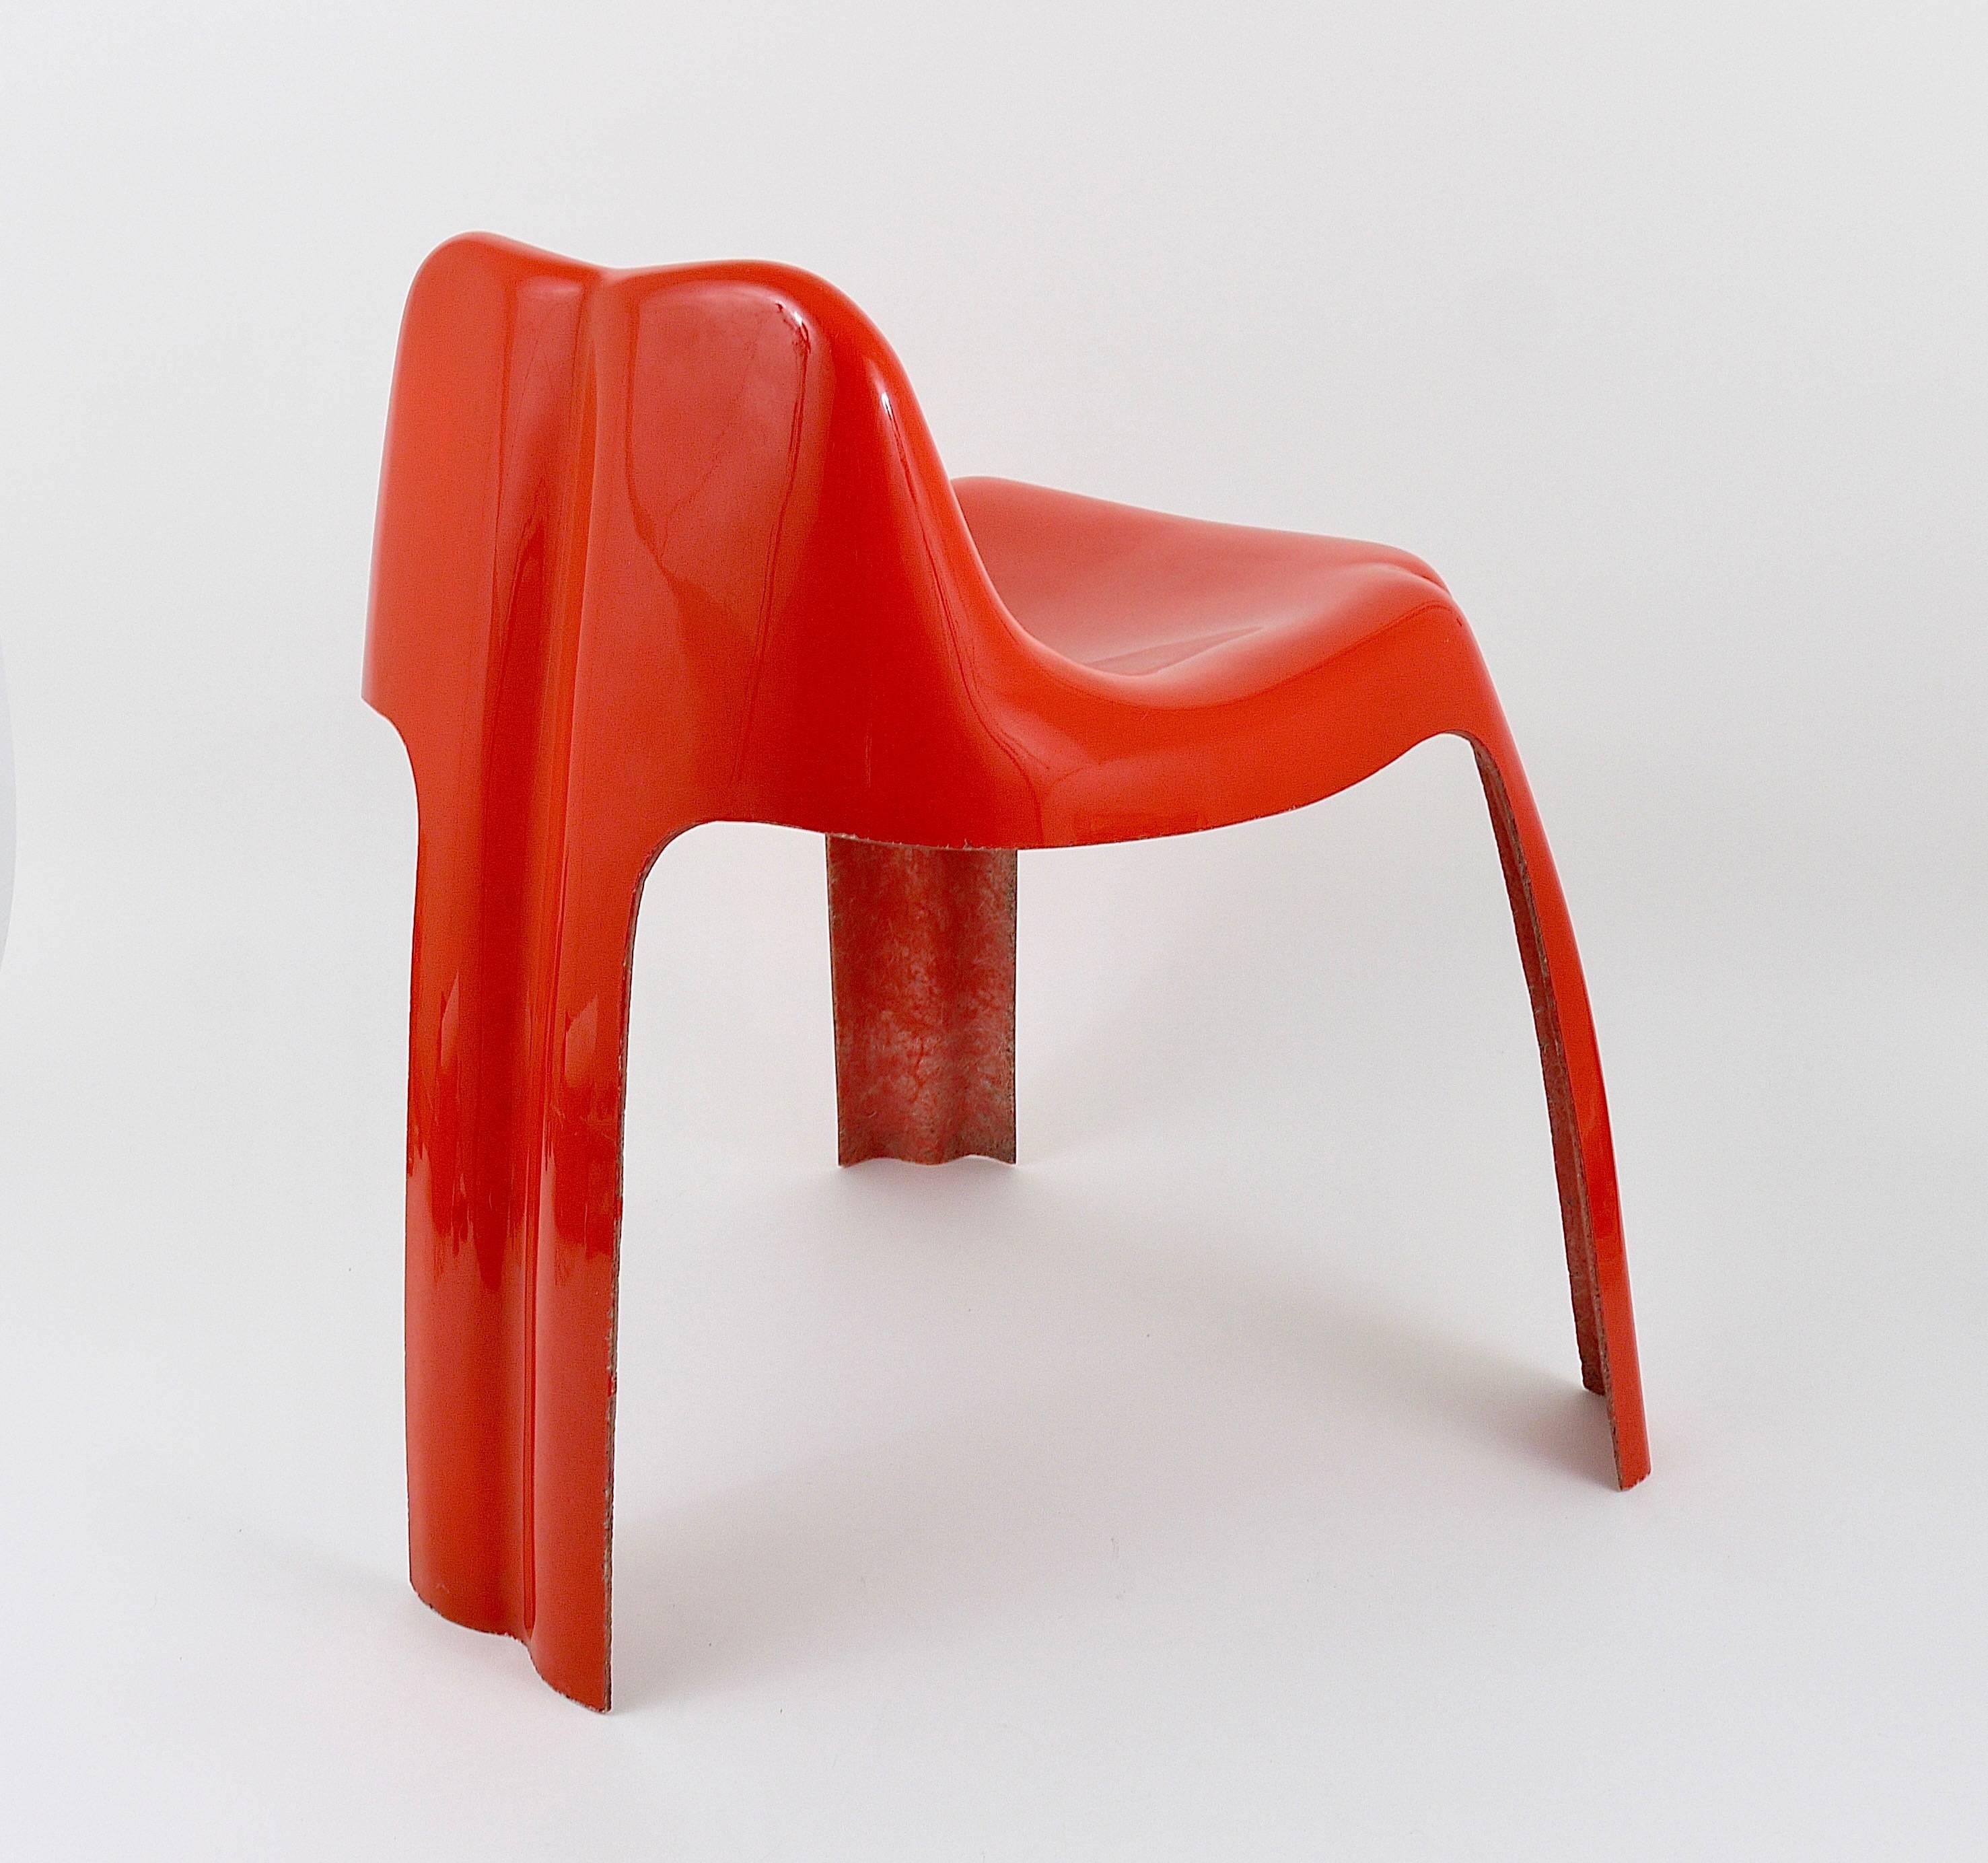 French Orange Fiberglass Chair Ginger by Patrick Gingembre, Paulus, France, 1970s For Sale